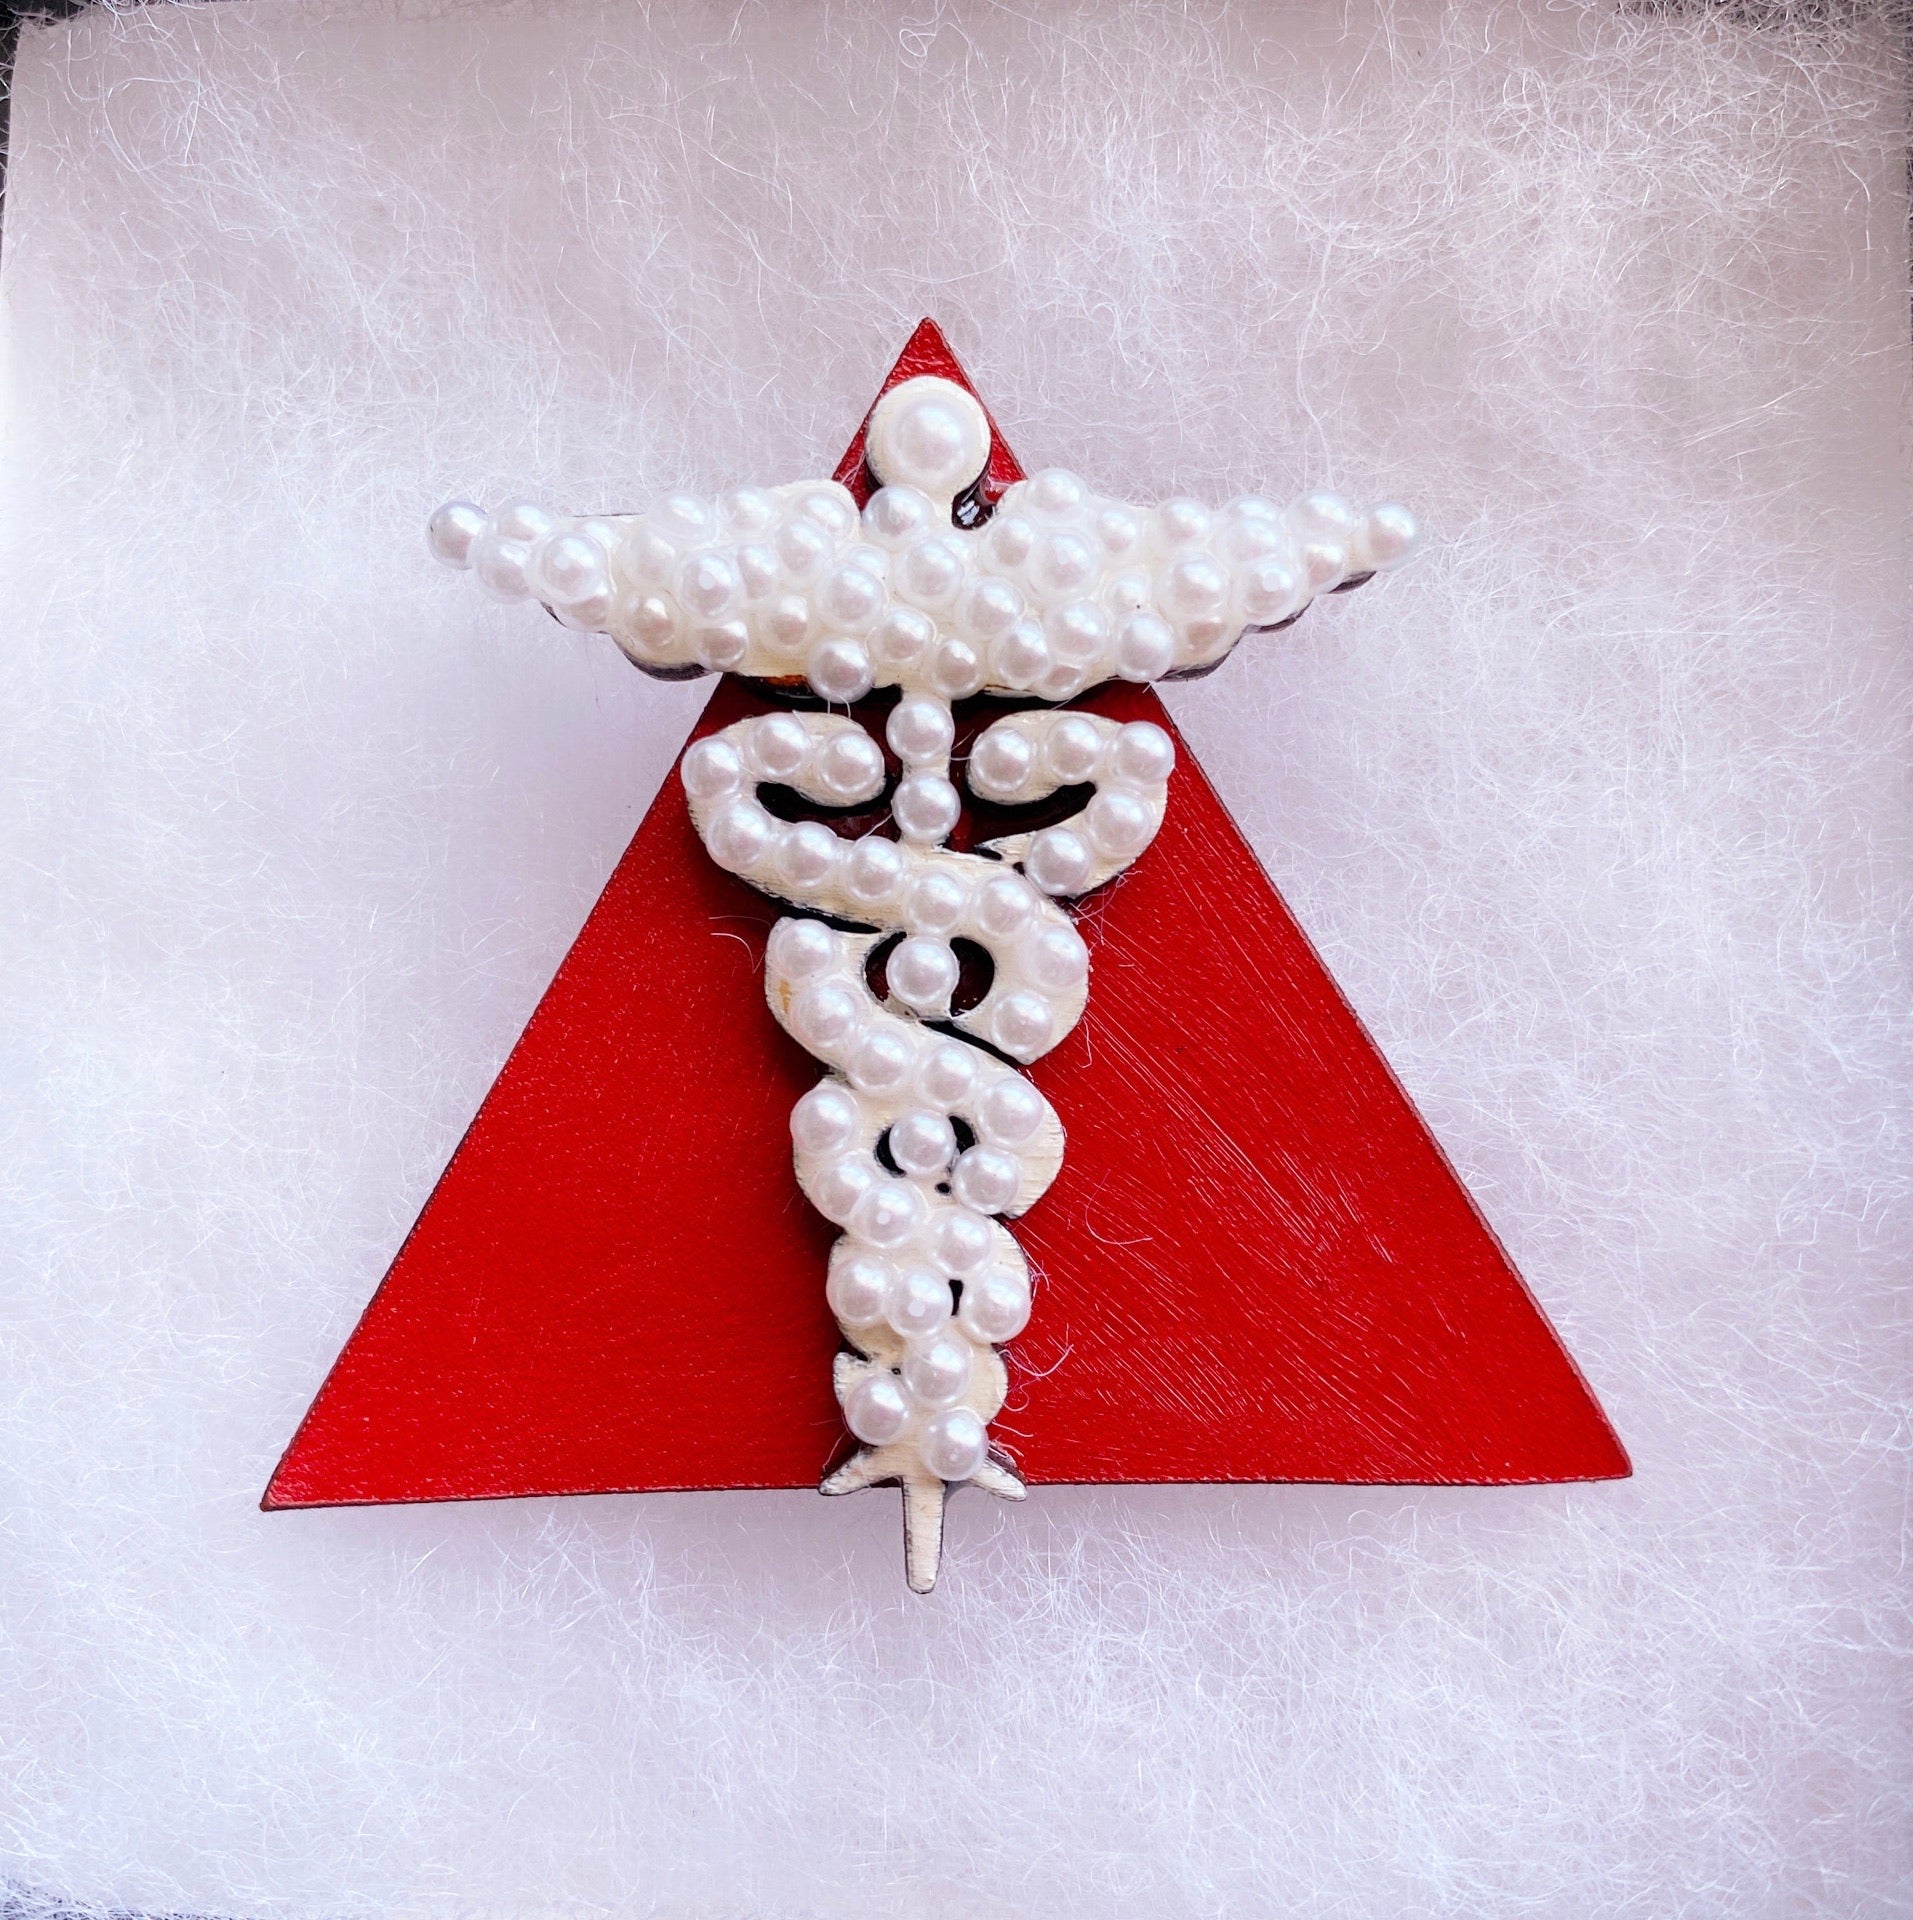 Red and pearl Caduceus medical brooch for healthcare professionals - crimson and cream Delta Sigma Theta sorors.